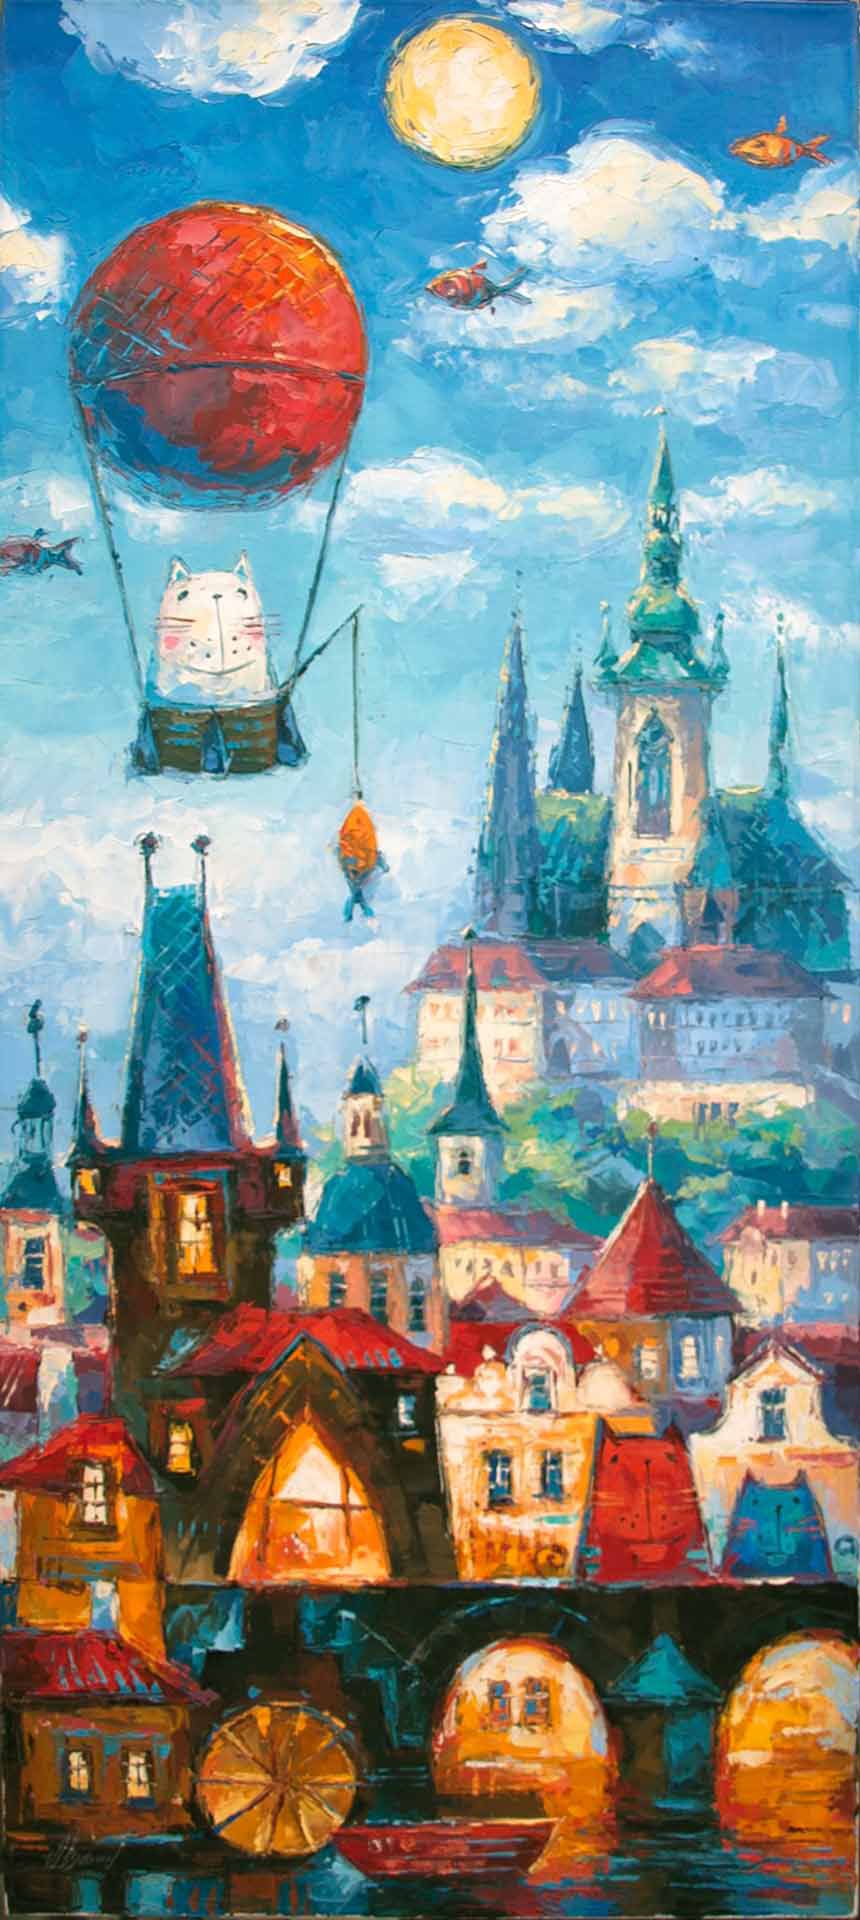 Medieval town. White cat in a balloon. A fabulous picture for children. Contemporary painting. Prague. A cat with a fishing rod is fishing. Gold fish. Bridge and river.